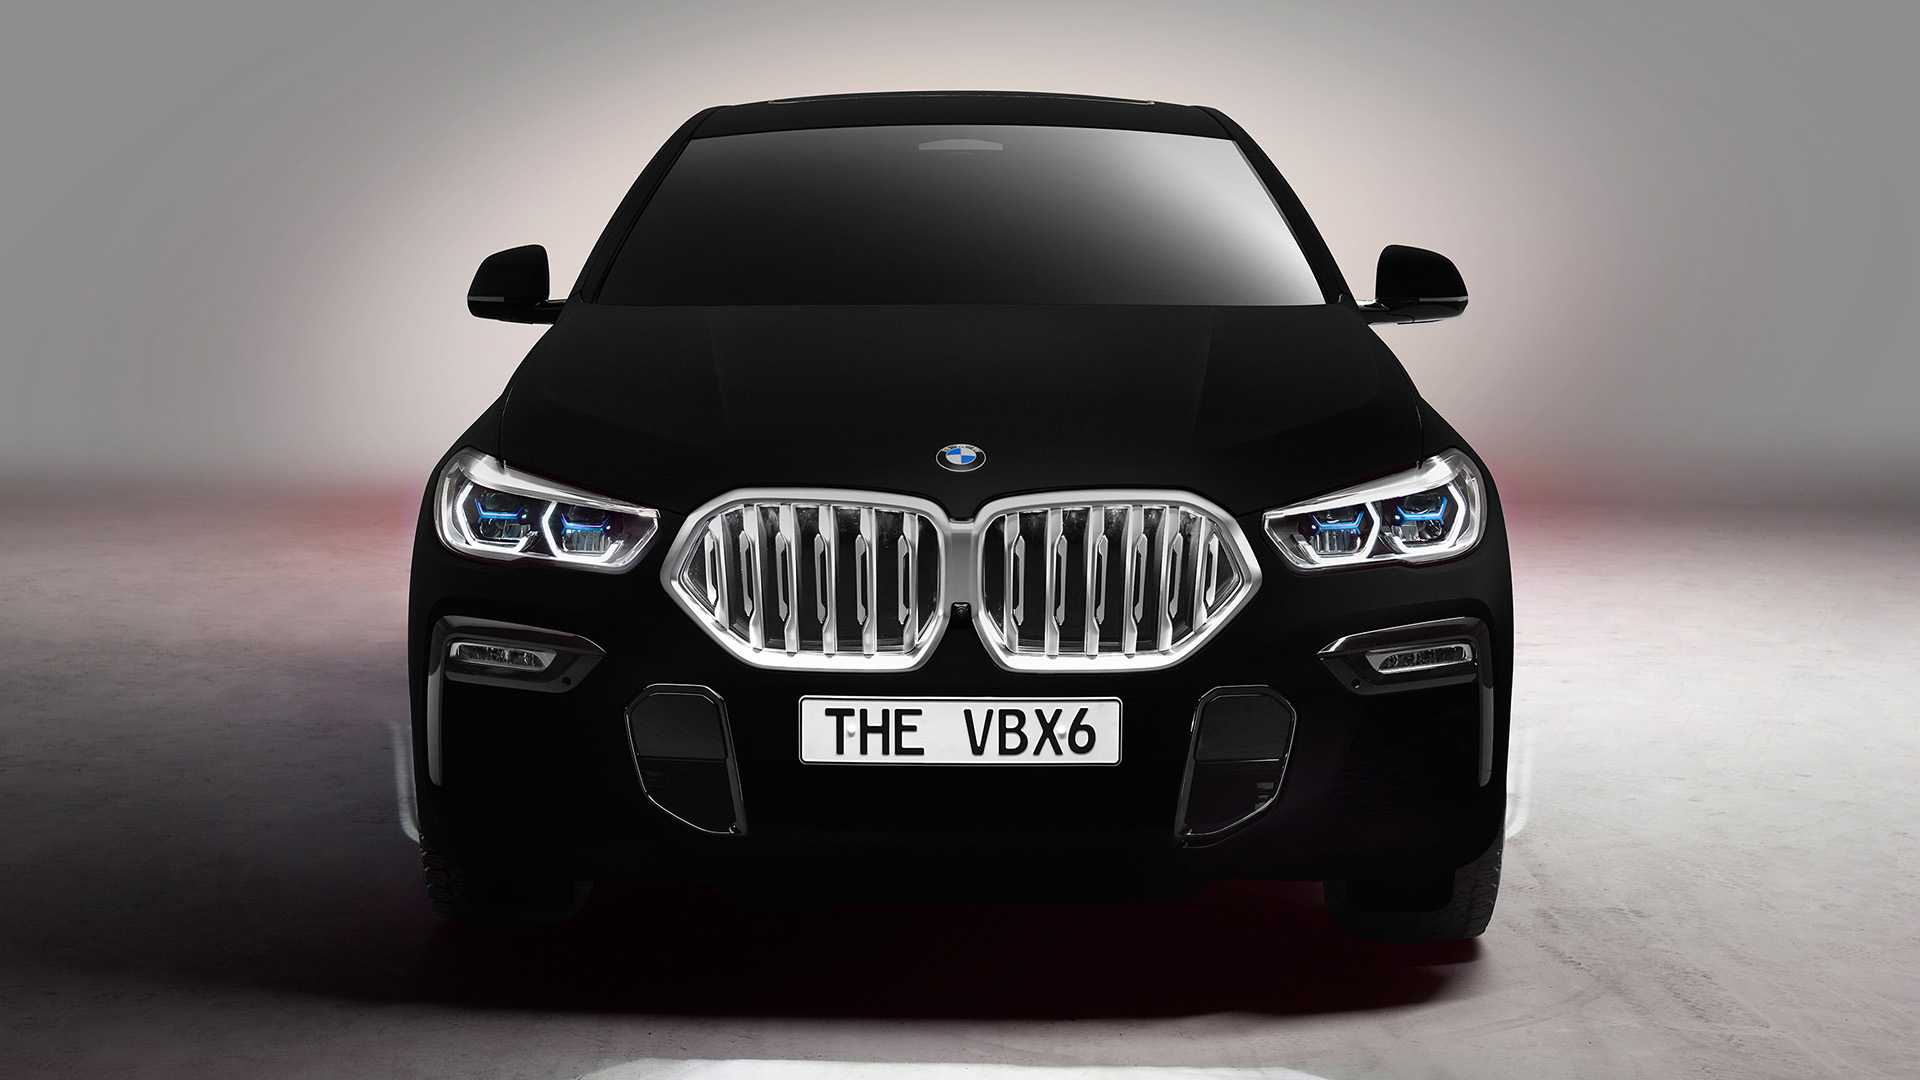 The darkest car in the world is a BMW